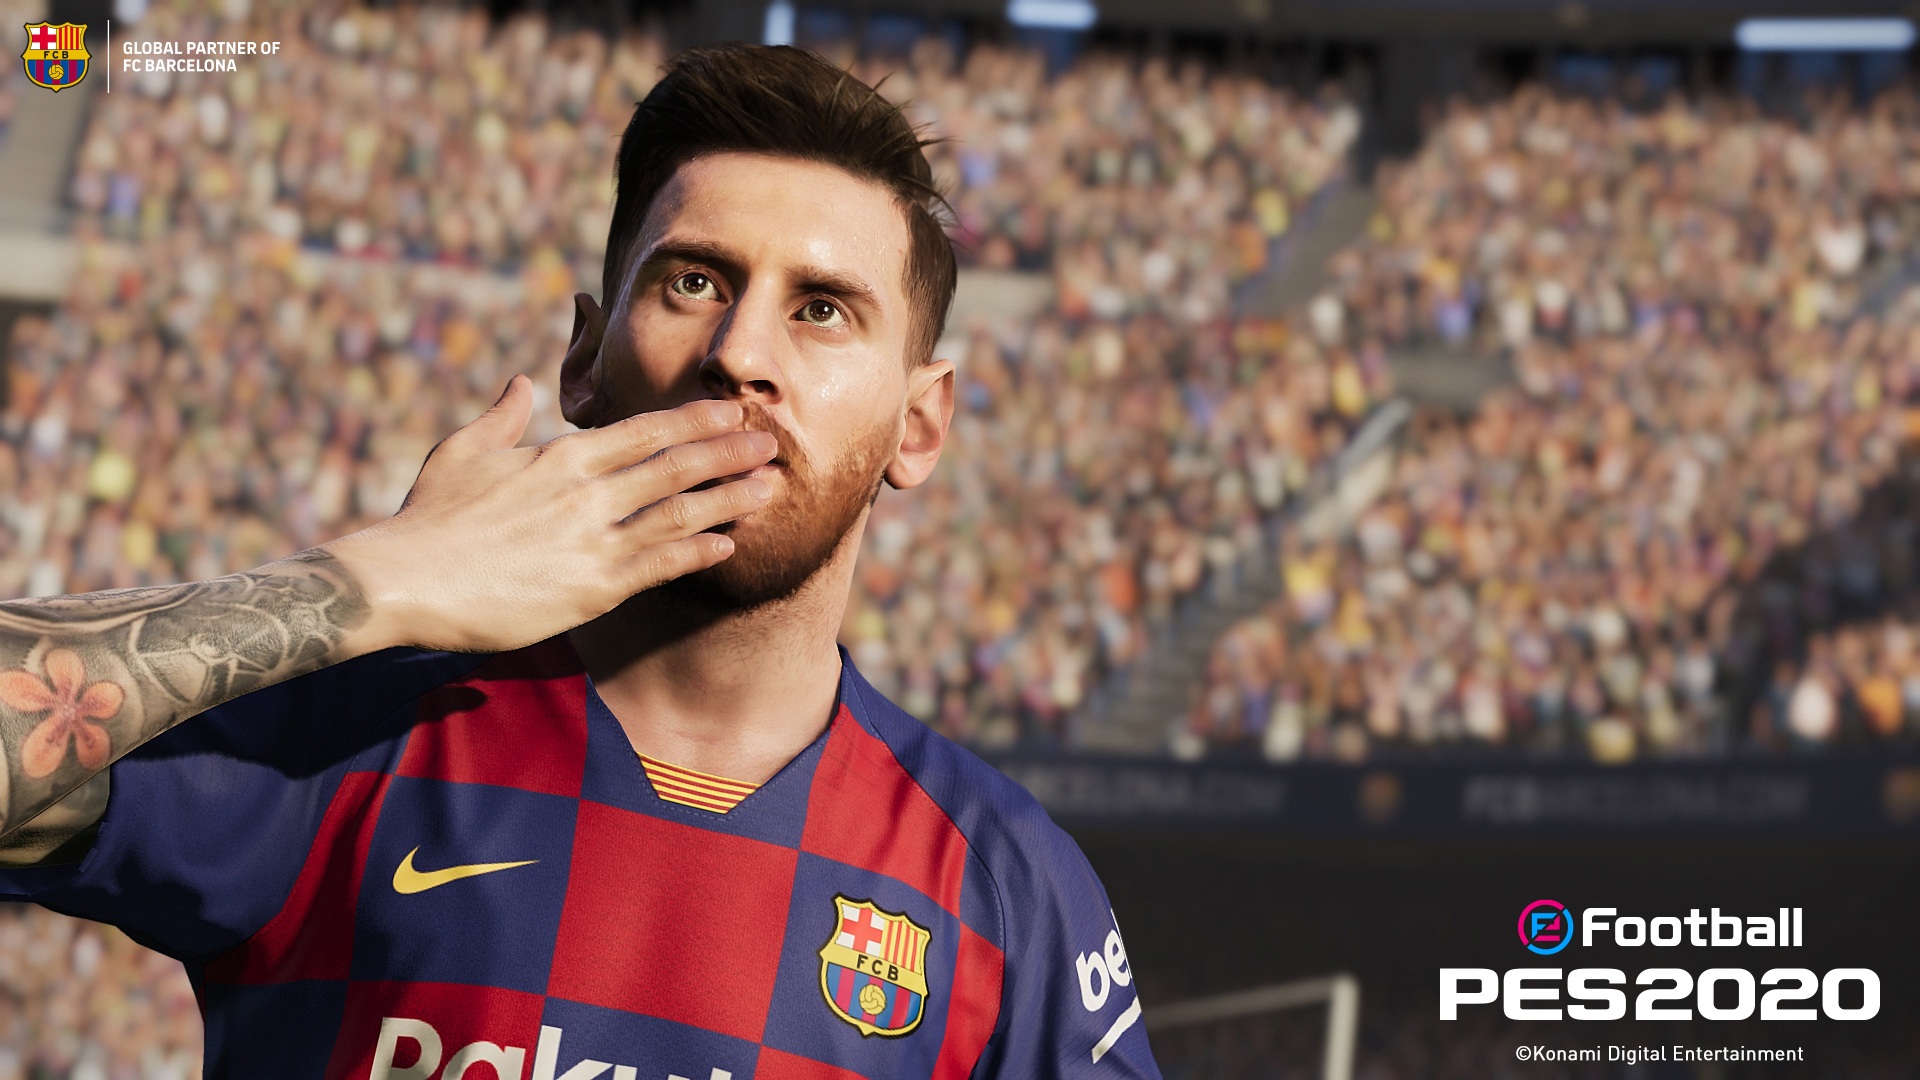 Video Game eFootball PES 2020 HD Wallpaper | Background Image